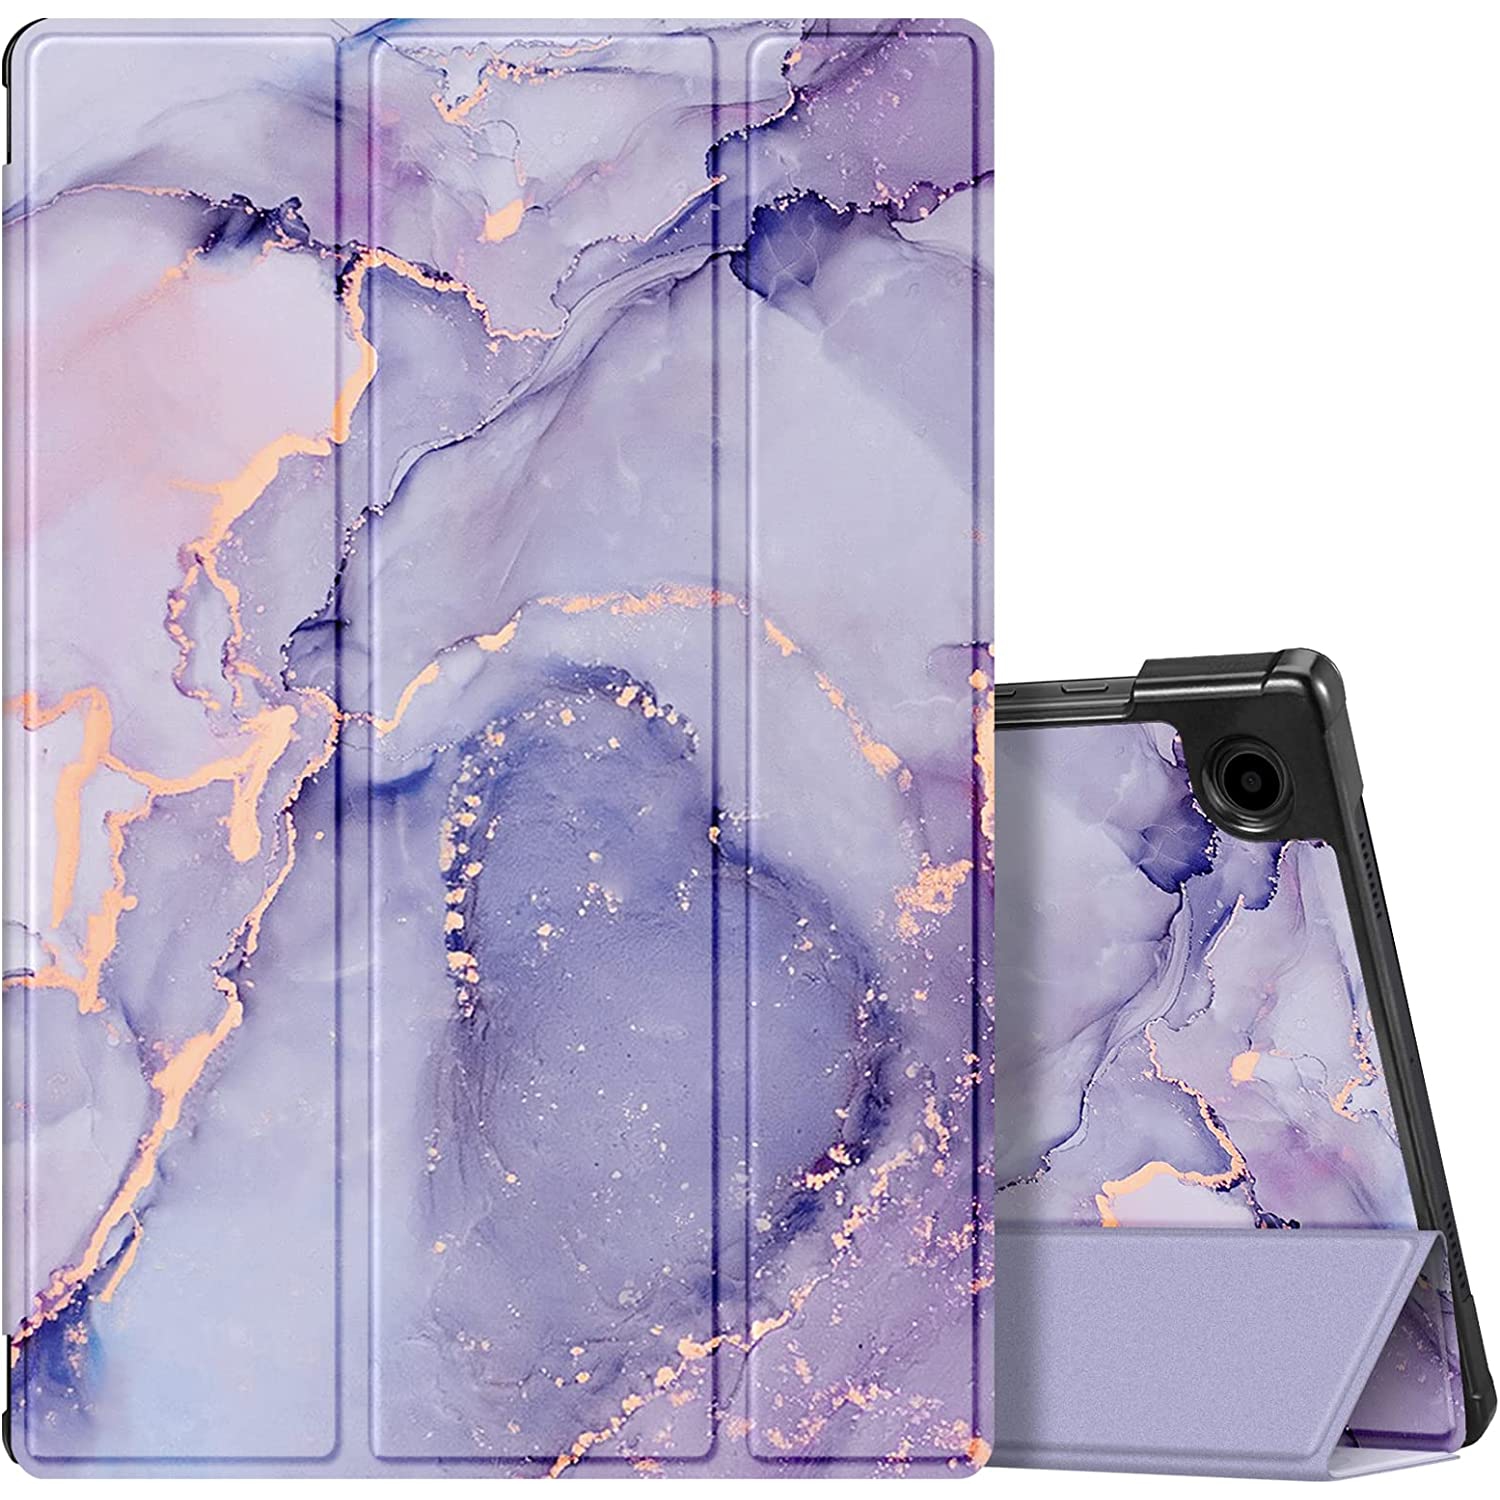 F Slim Case for Samsung Galaxy Tab A8 10.5 Inch 2022 Model (SM-X200/X205/X207), Ultra Thin Lightweight Hard Back Shell Tri-Fold Stand Cover with Auto Wake/Sleep, Lilac Marble